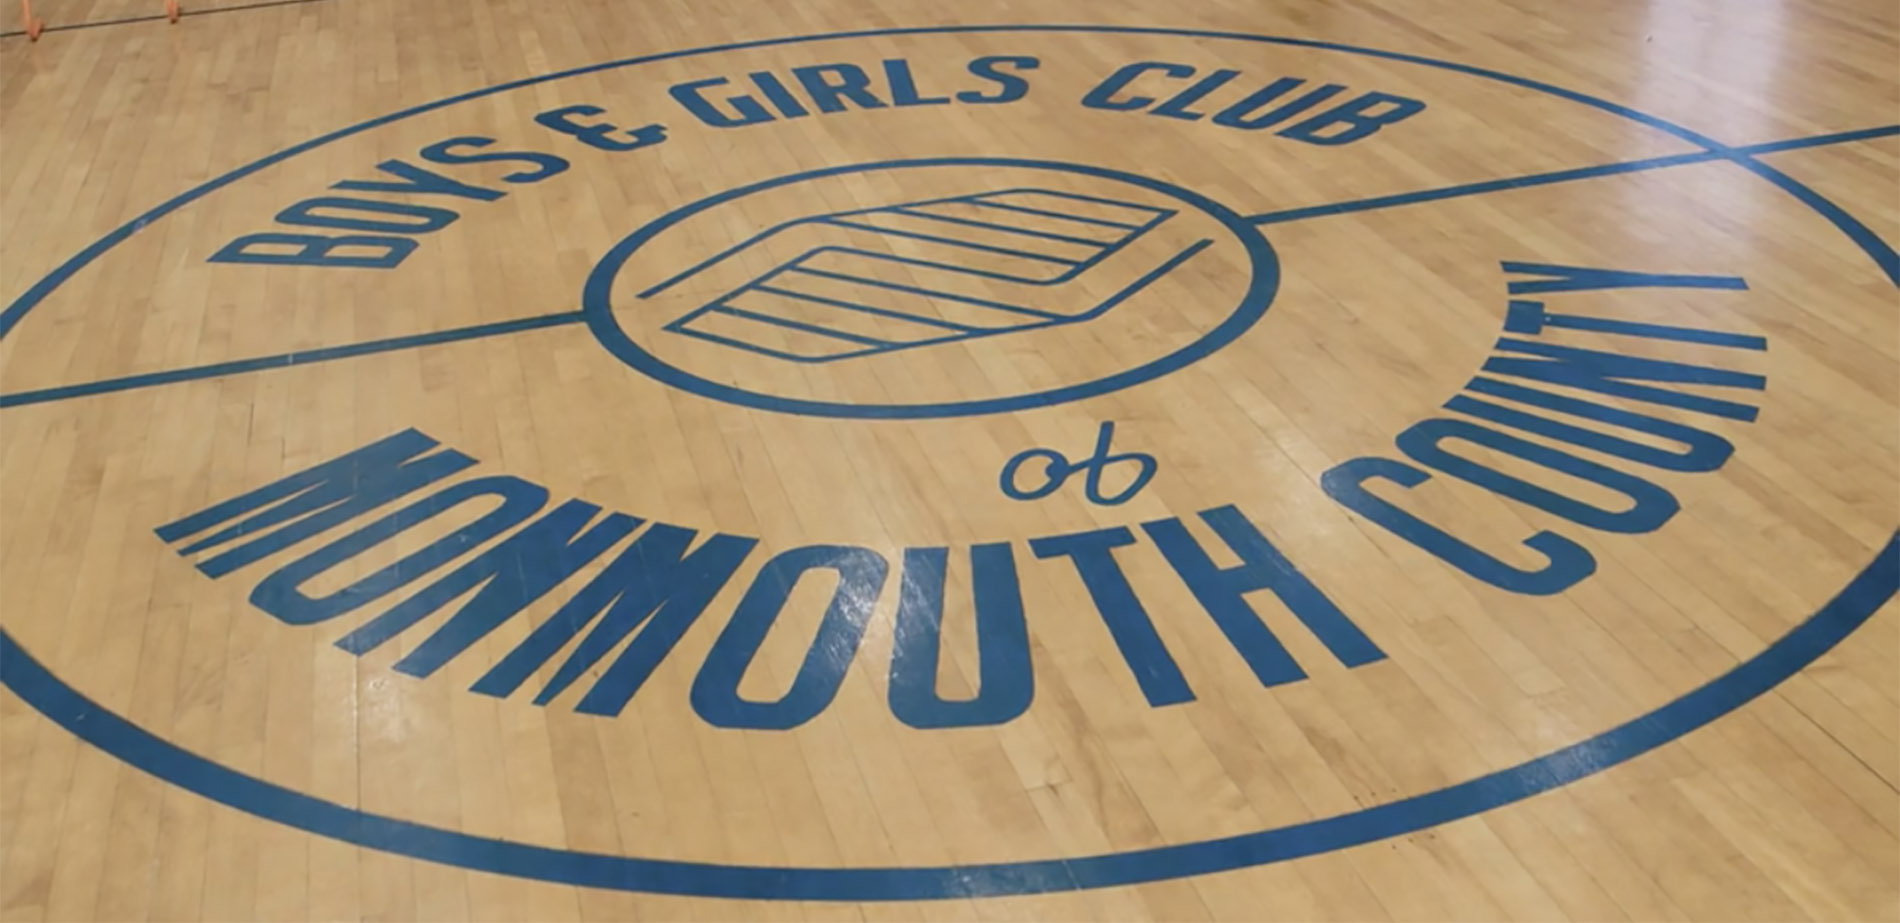 Boys and Girls Club Monmouth County